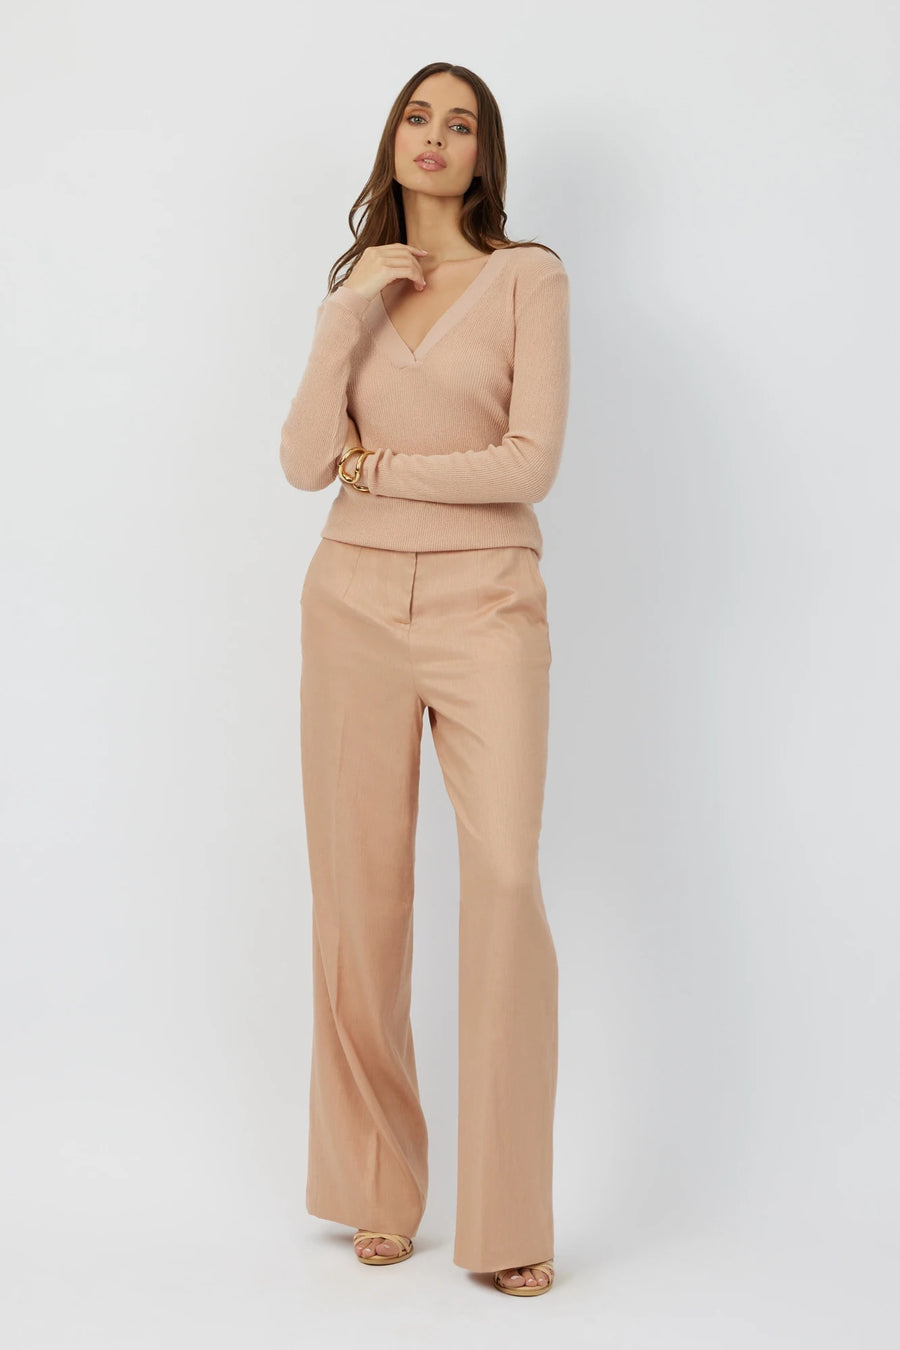 The Regatta belted wide leg pants in sesame by Greyven